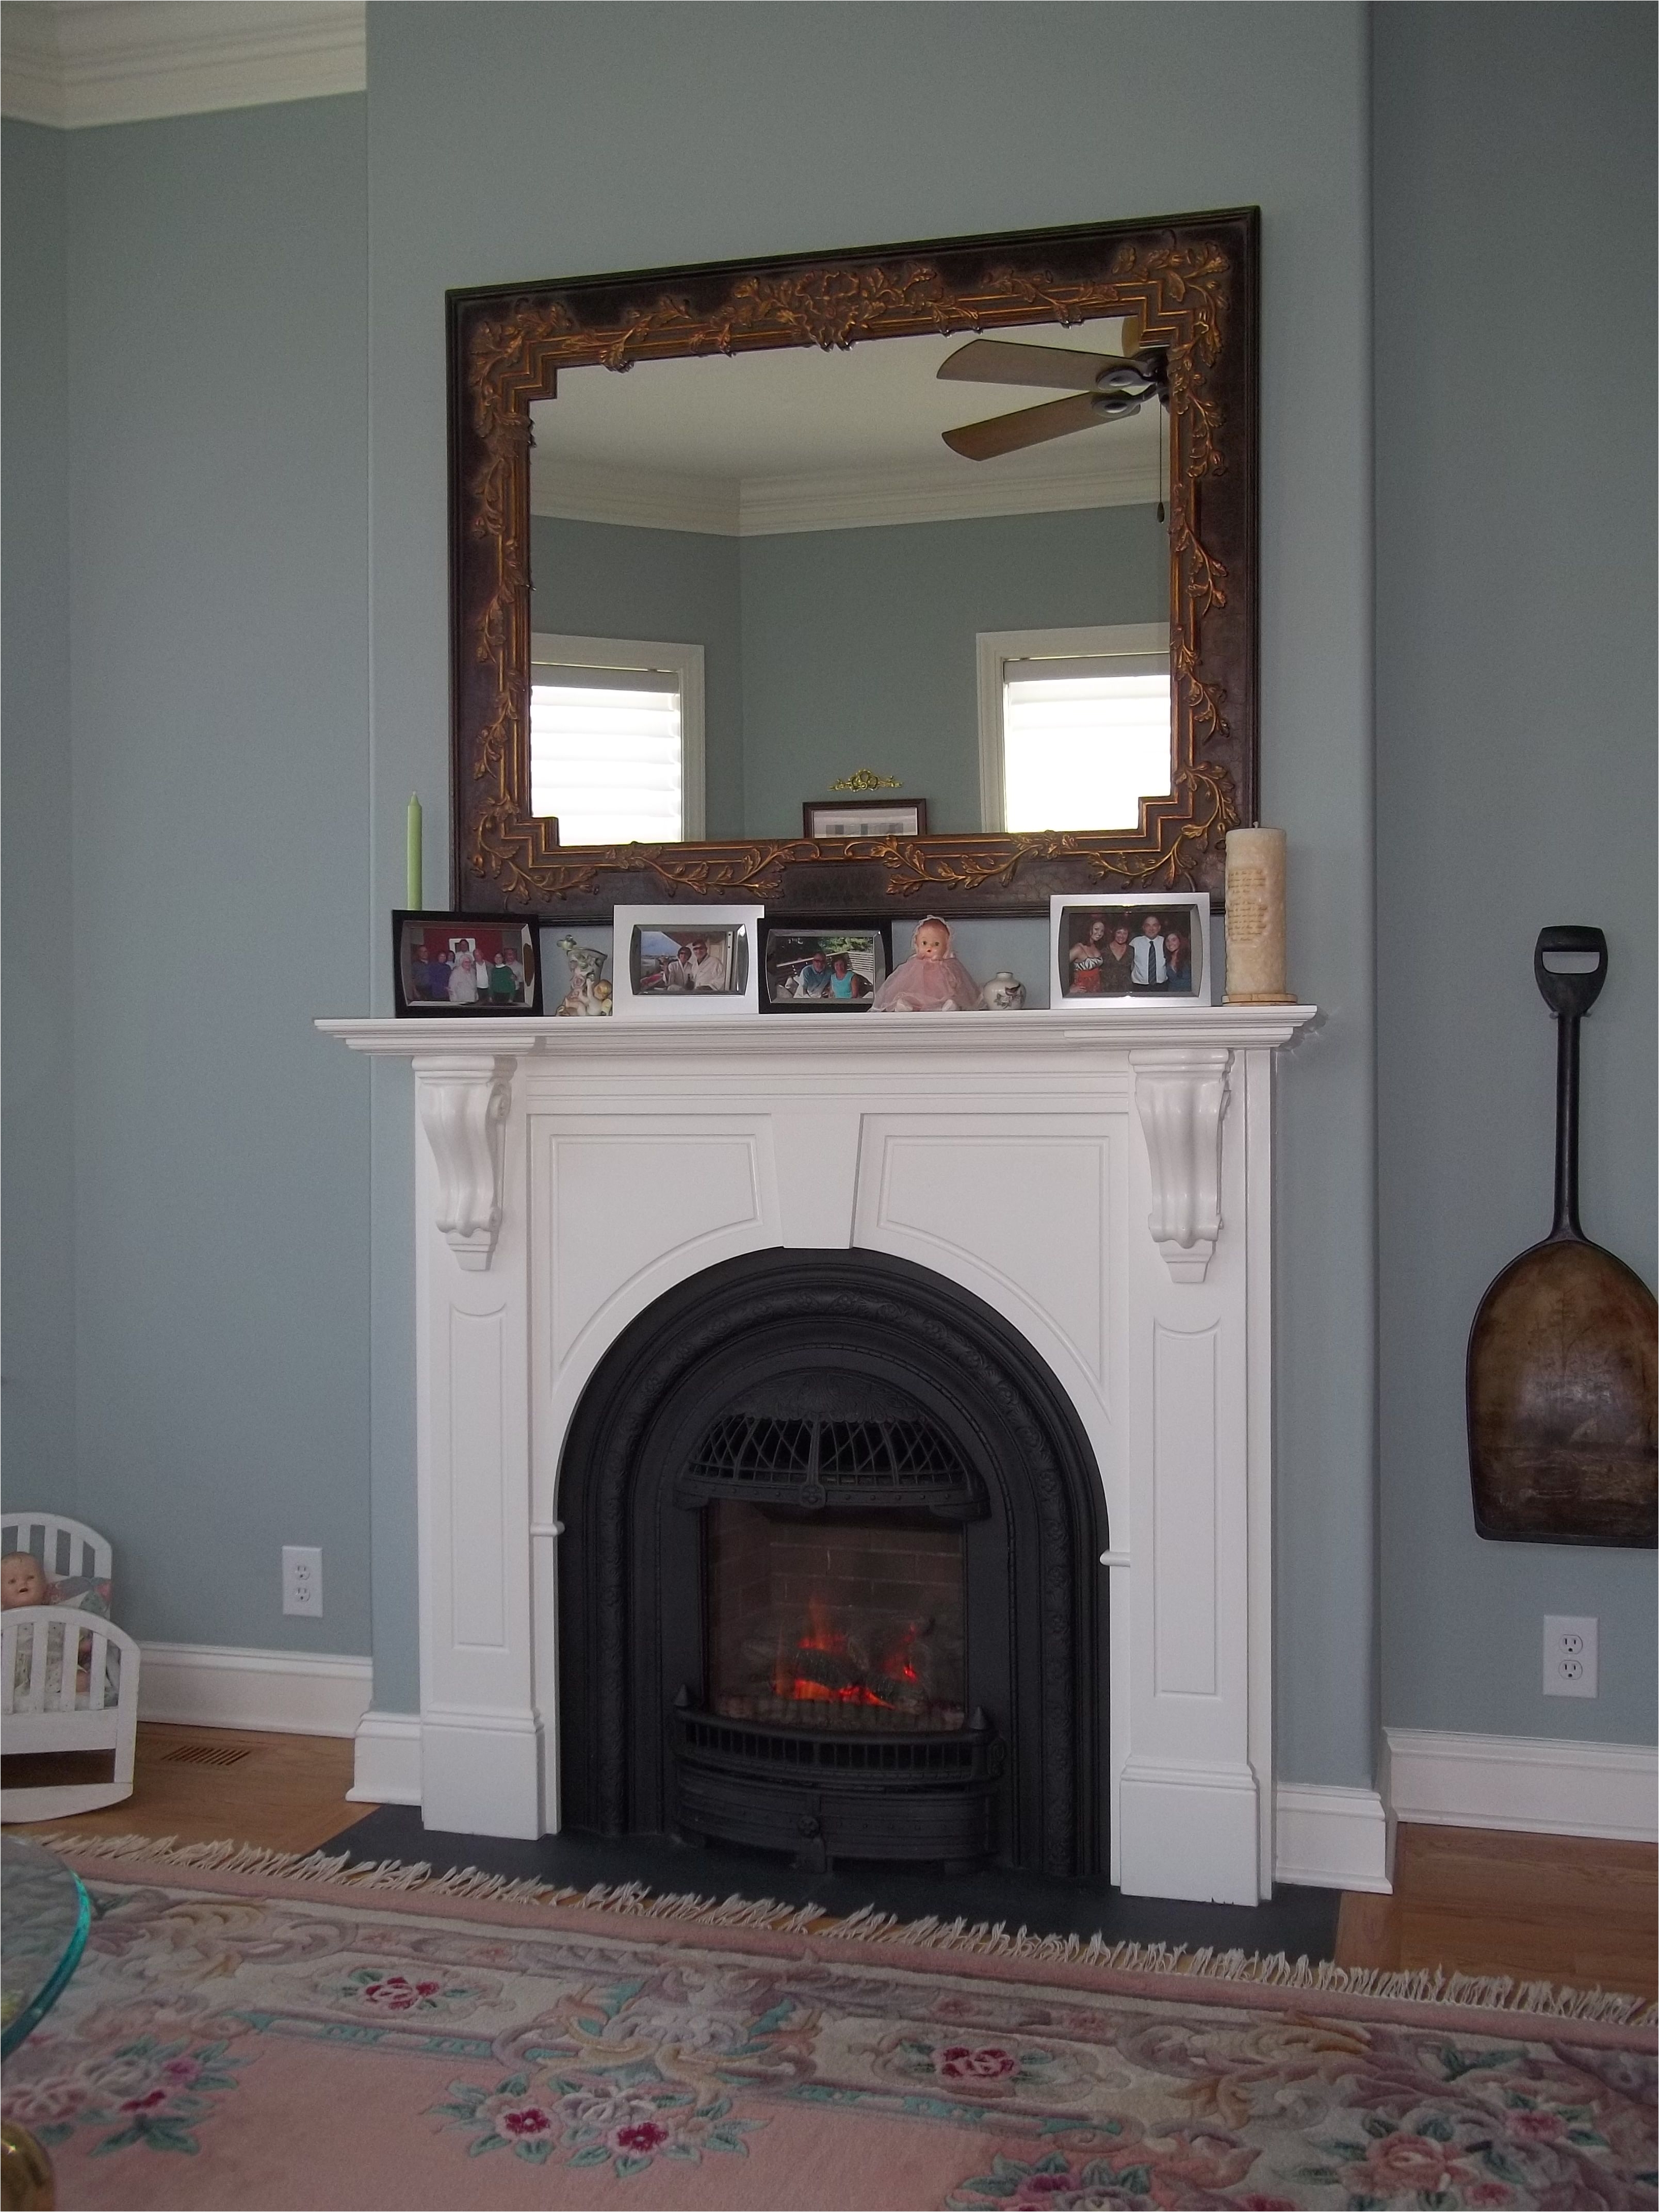 the valor windsor arch portrait style gas fireplace making a master suite sitting area more cozy